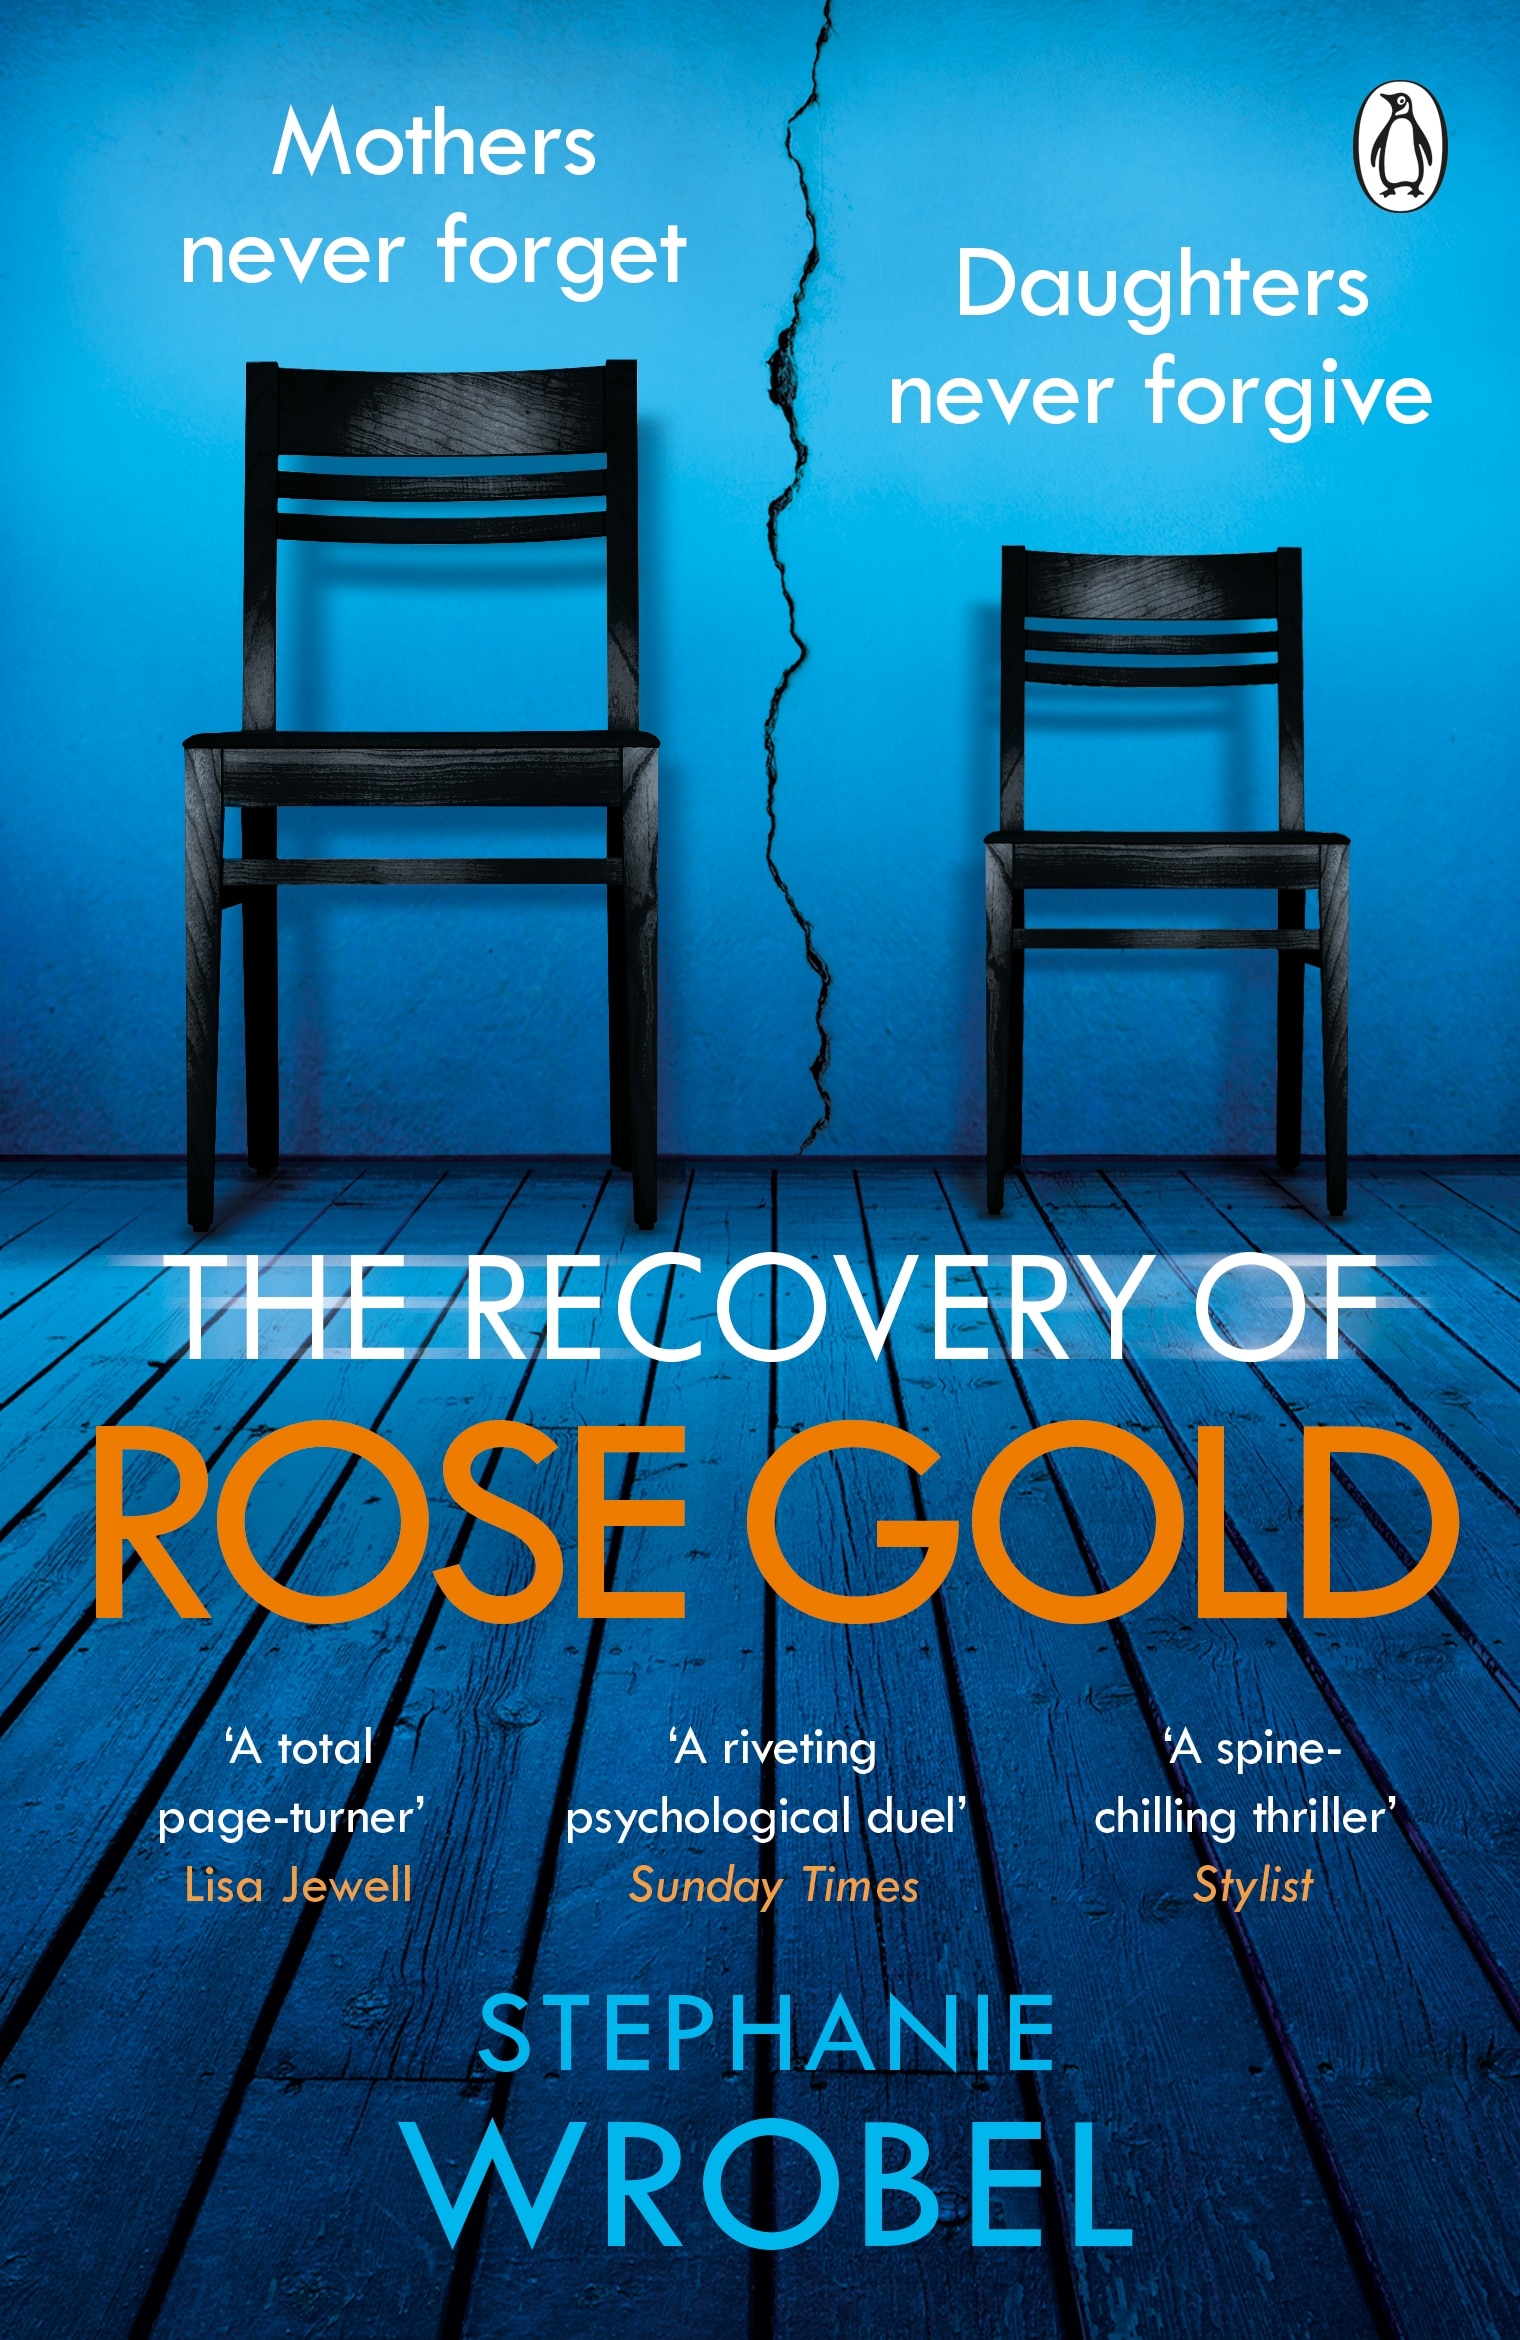 The Recovery of Rose Gold by Stephanie Wrobel, one of the best books out this month